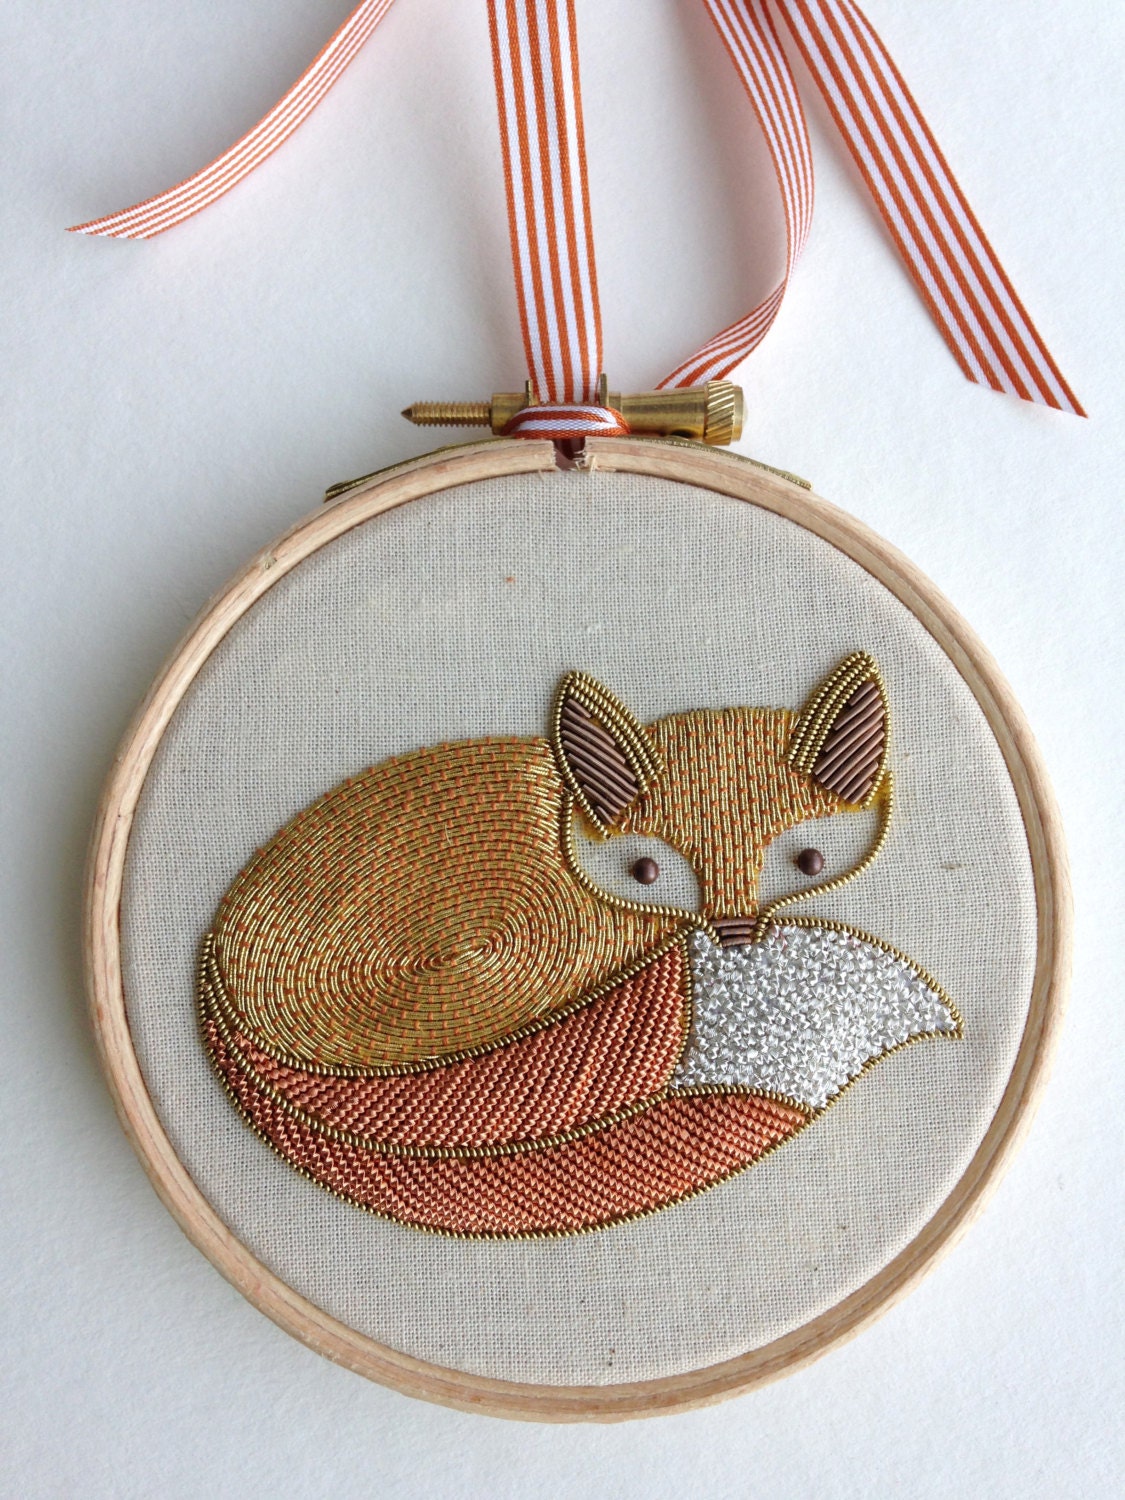 Download Metalwork Embroidery Fox Kit